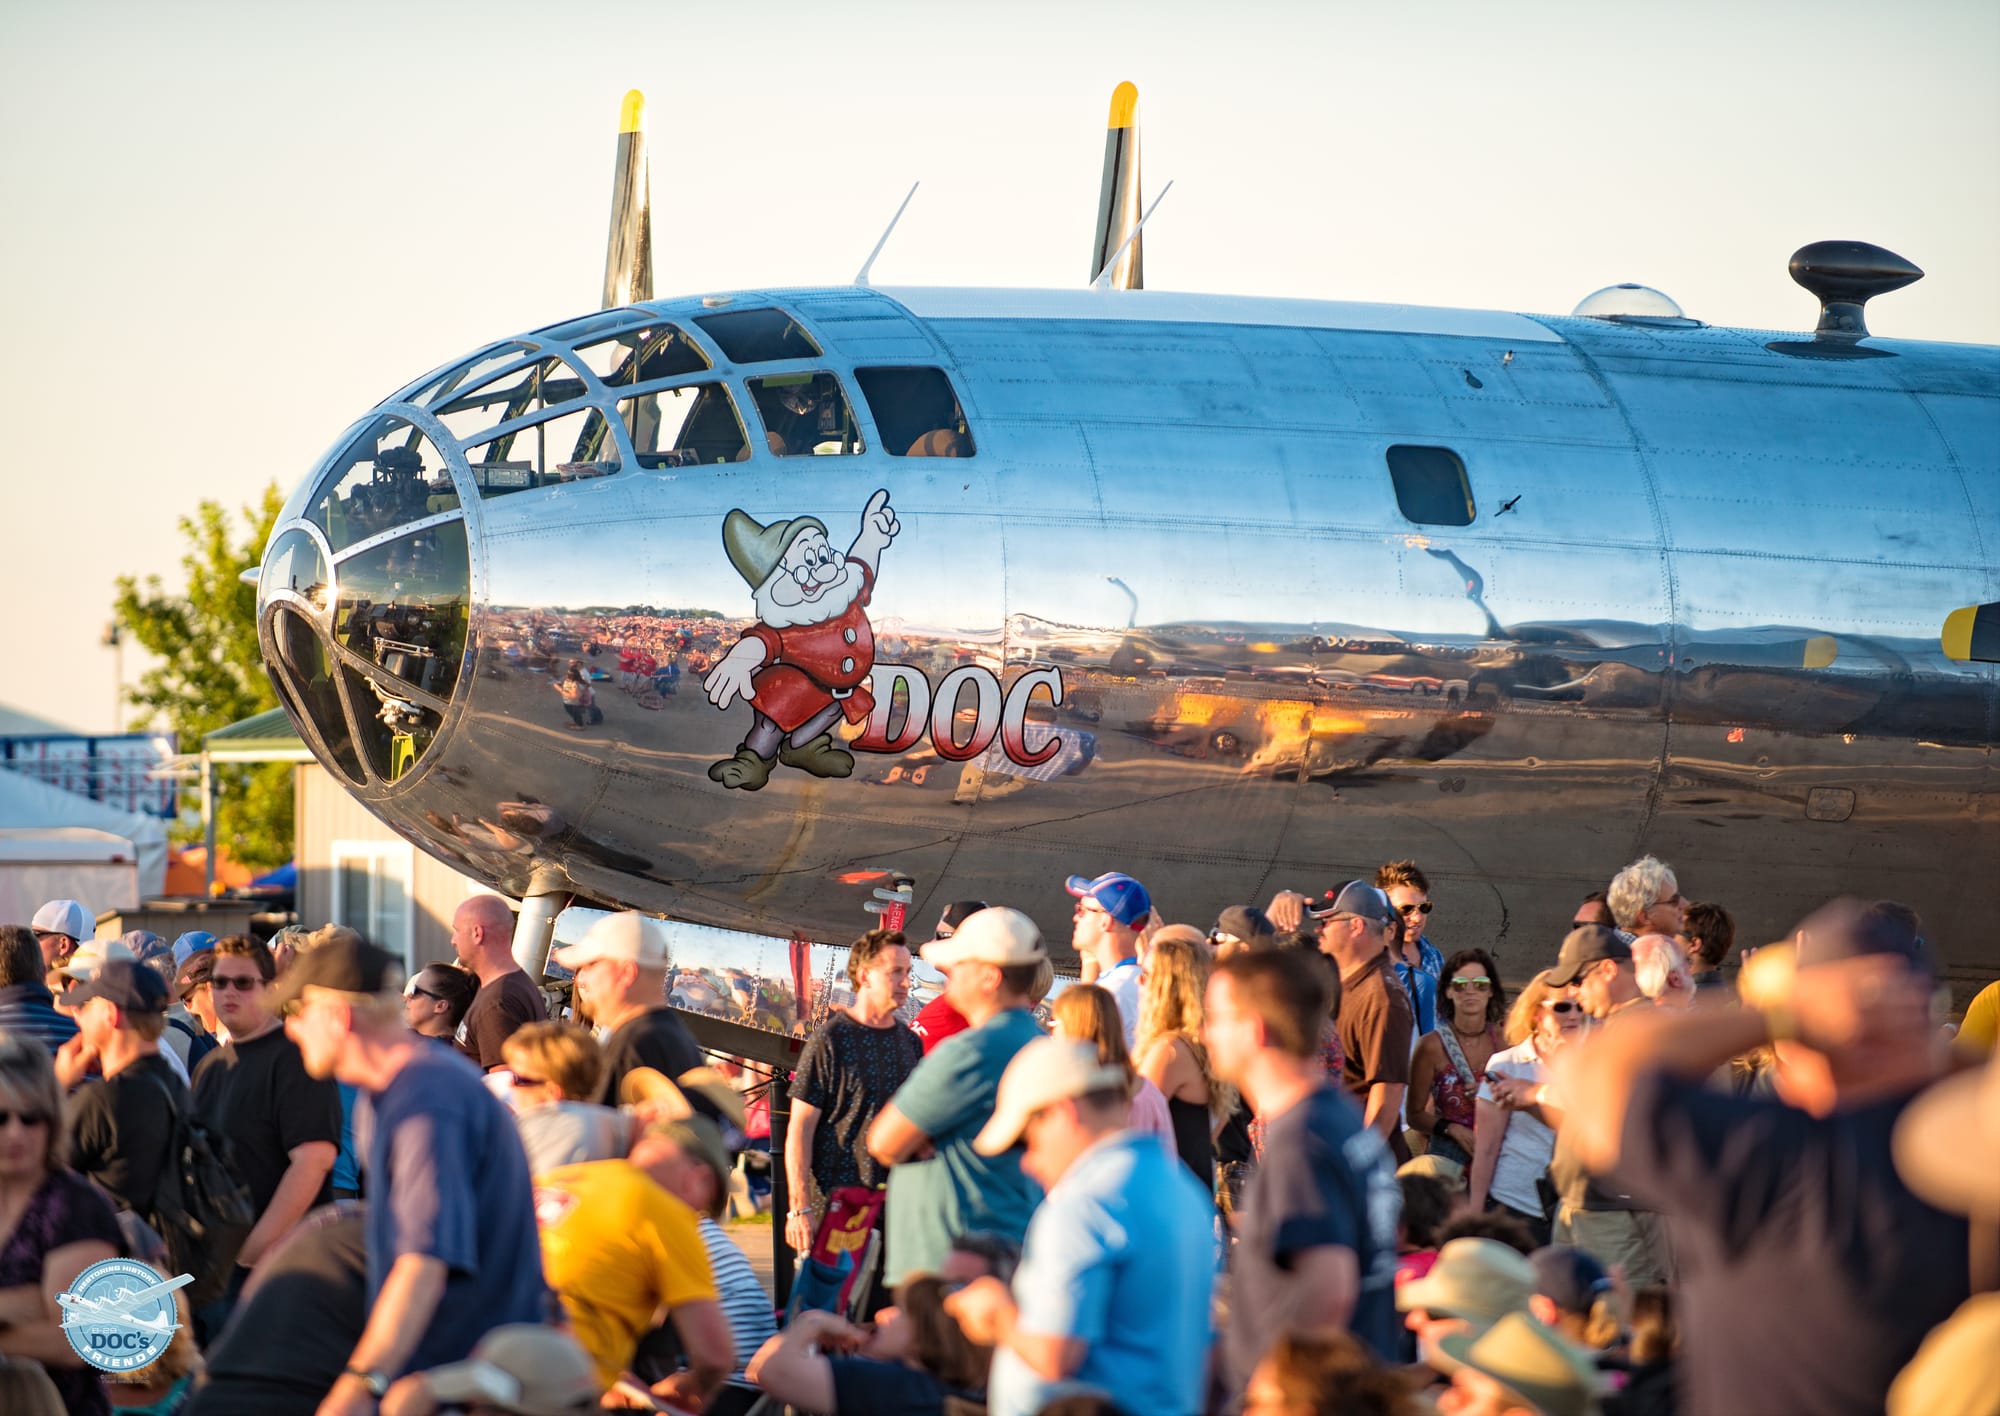 B-29 Doc to Bring its History Restored Tour to Stillwater, OK